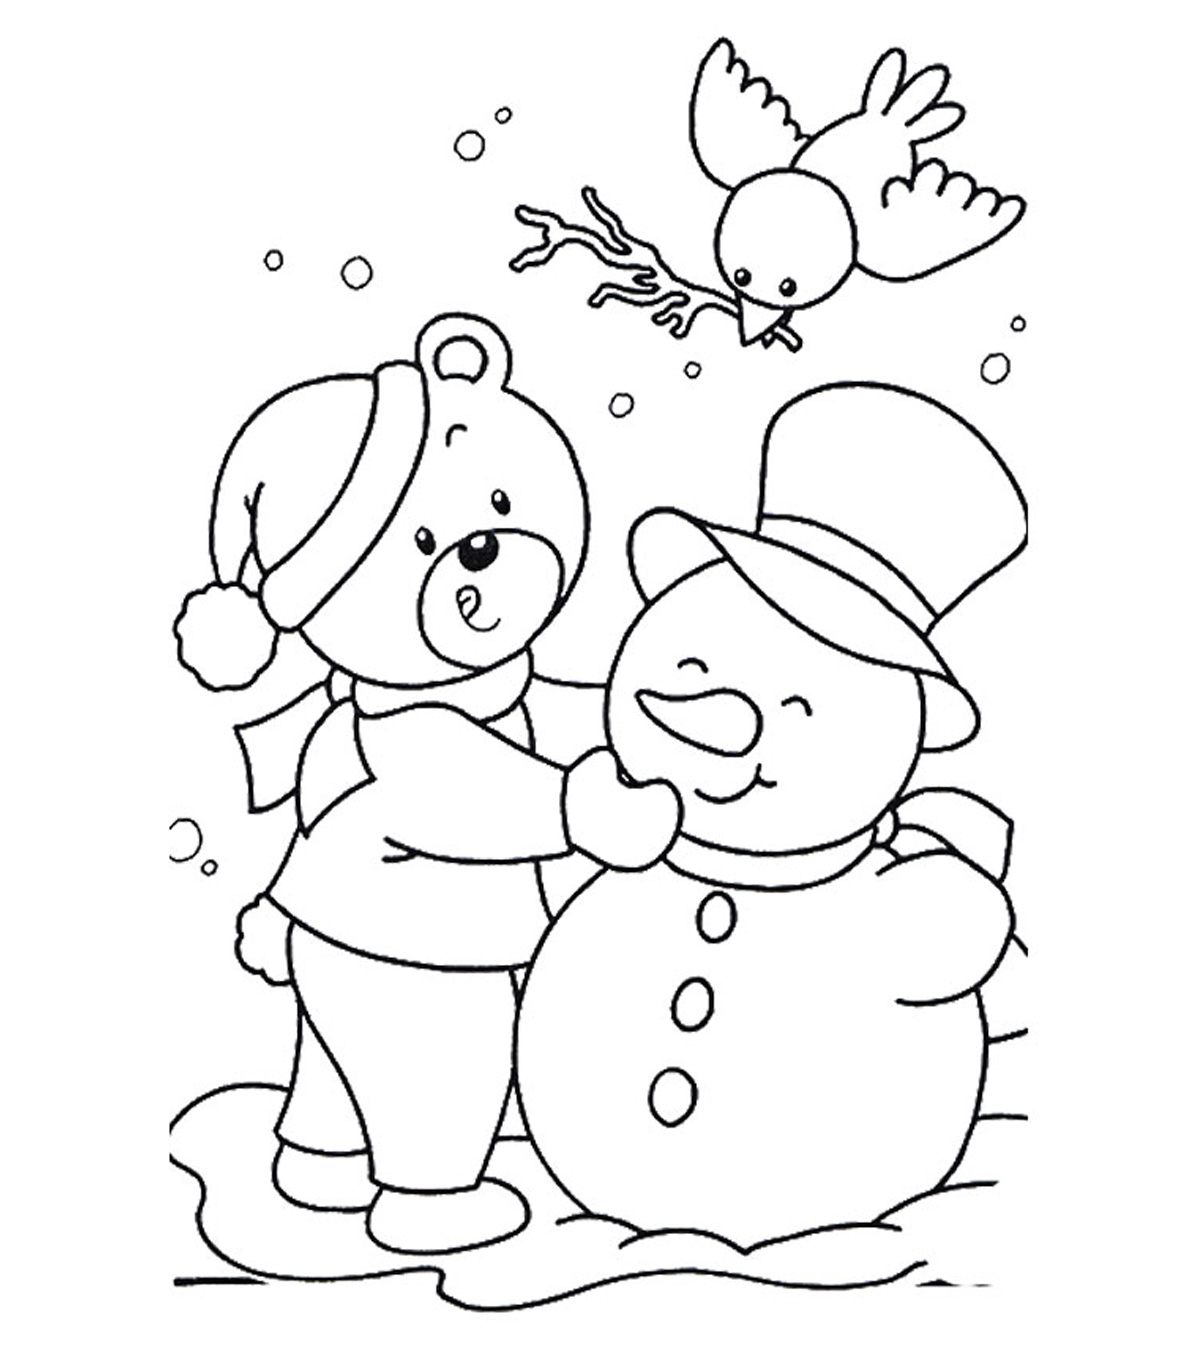 Download Season and Weather Coloring Pages - MomJunction